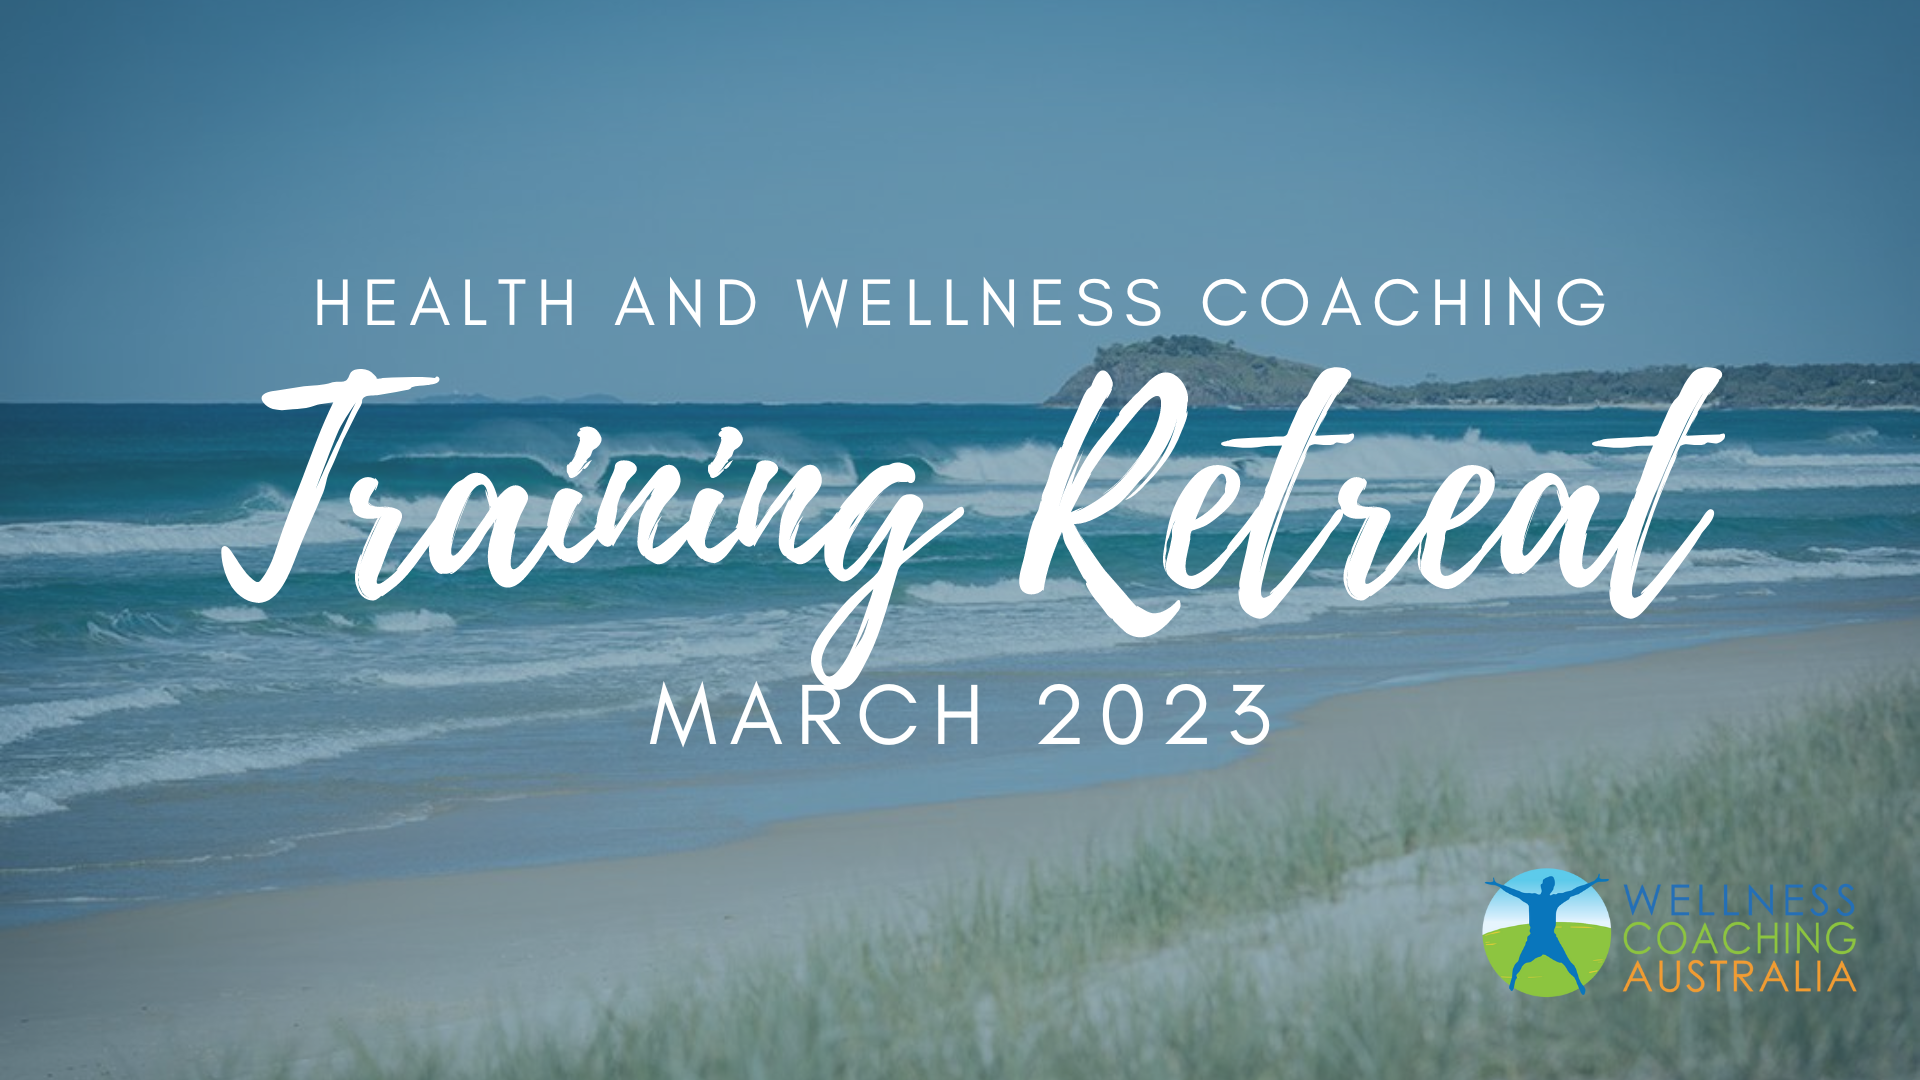 Professional Certificate in Health and Wellness Coaching